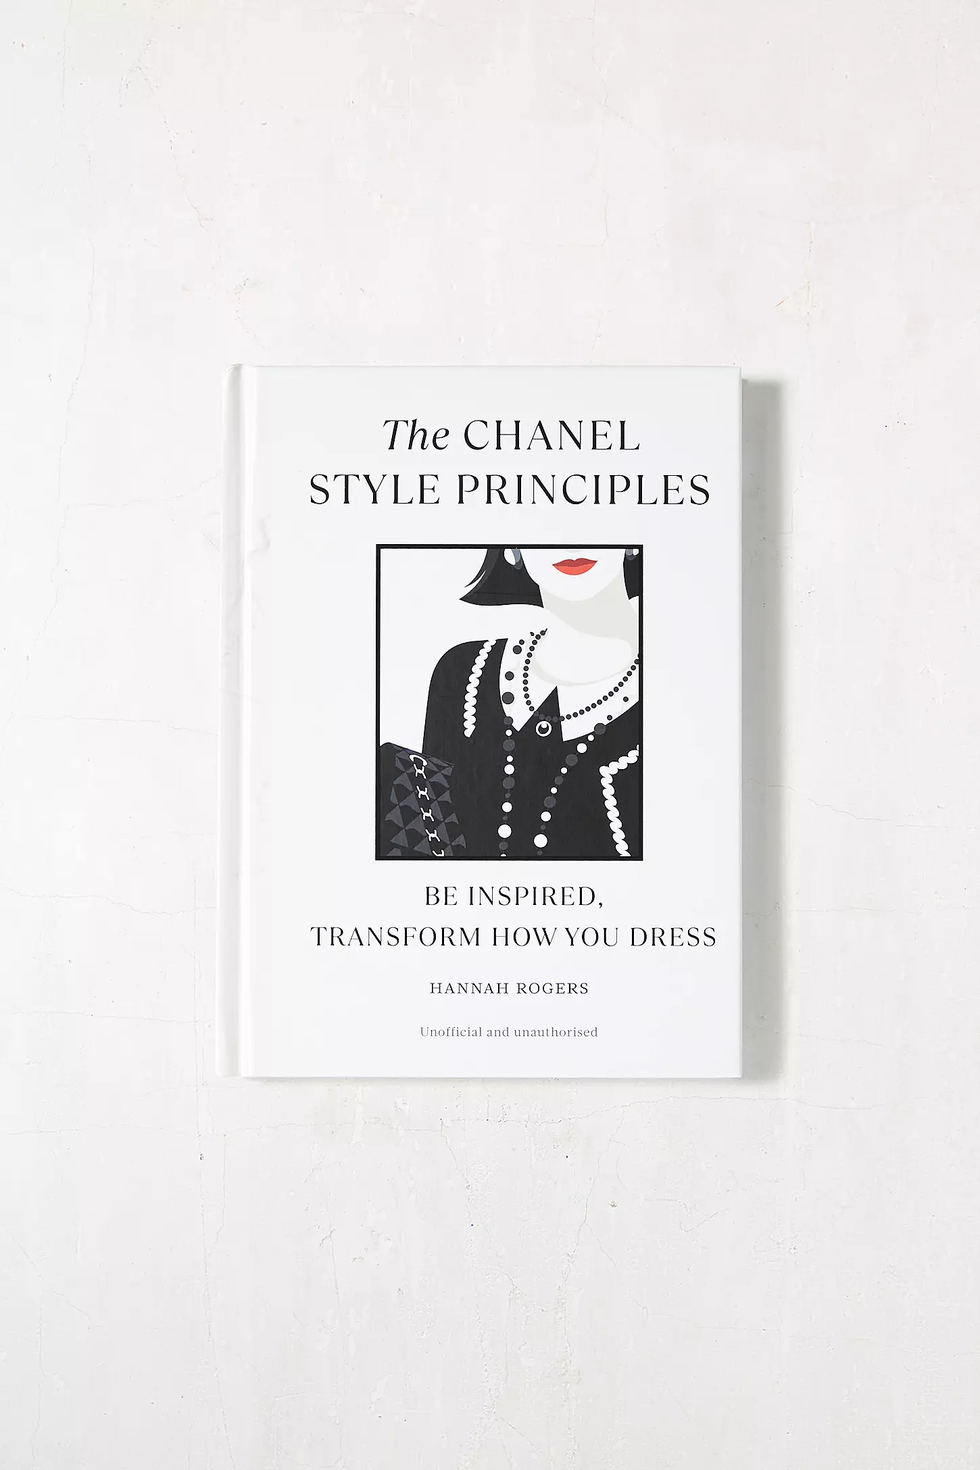 The Chanel Style Principles by Hannah Rogers